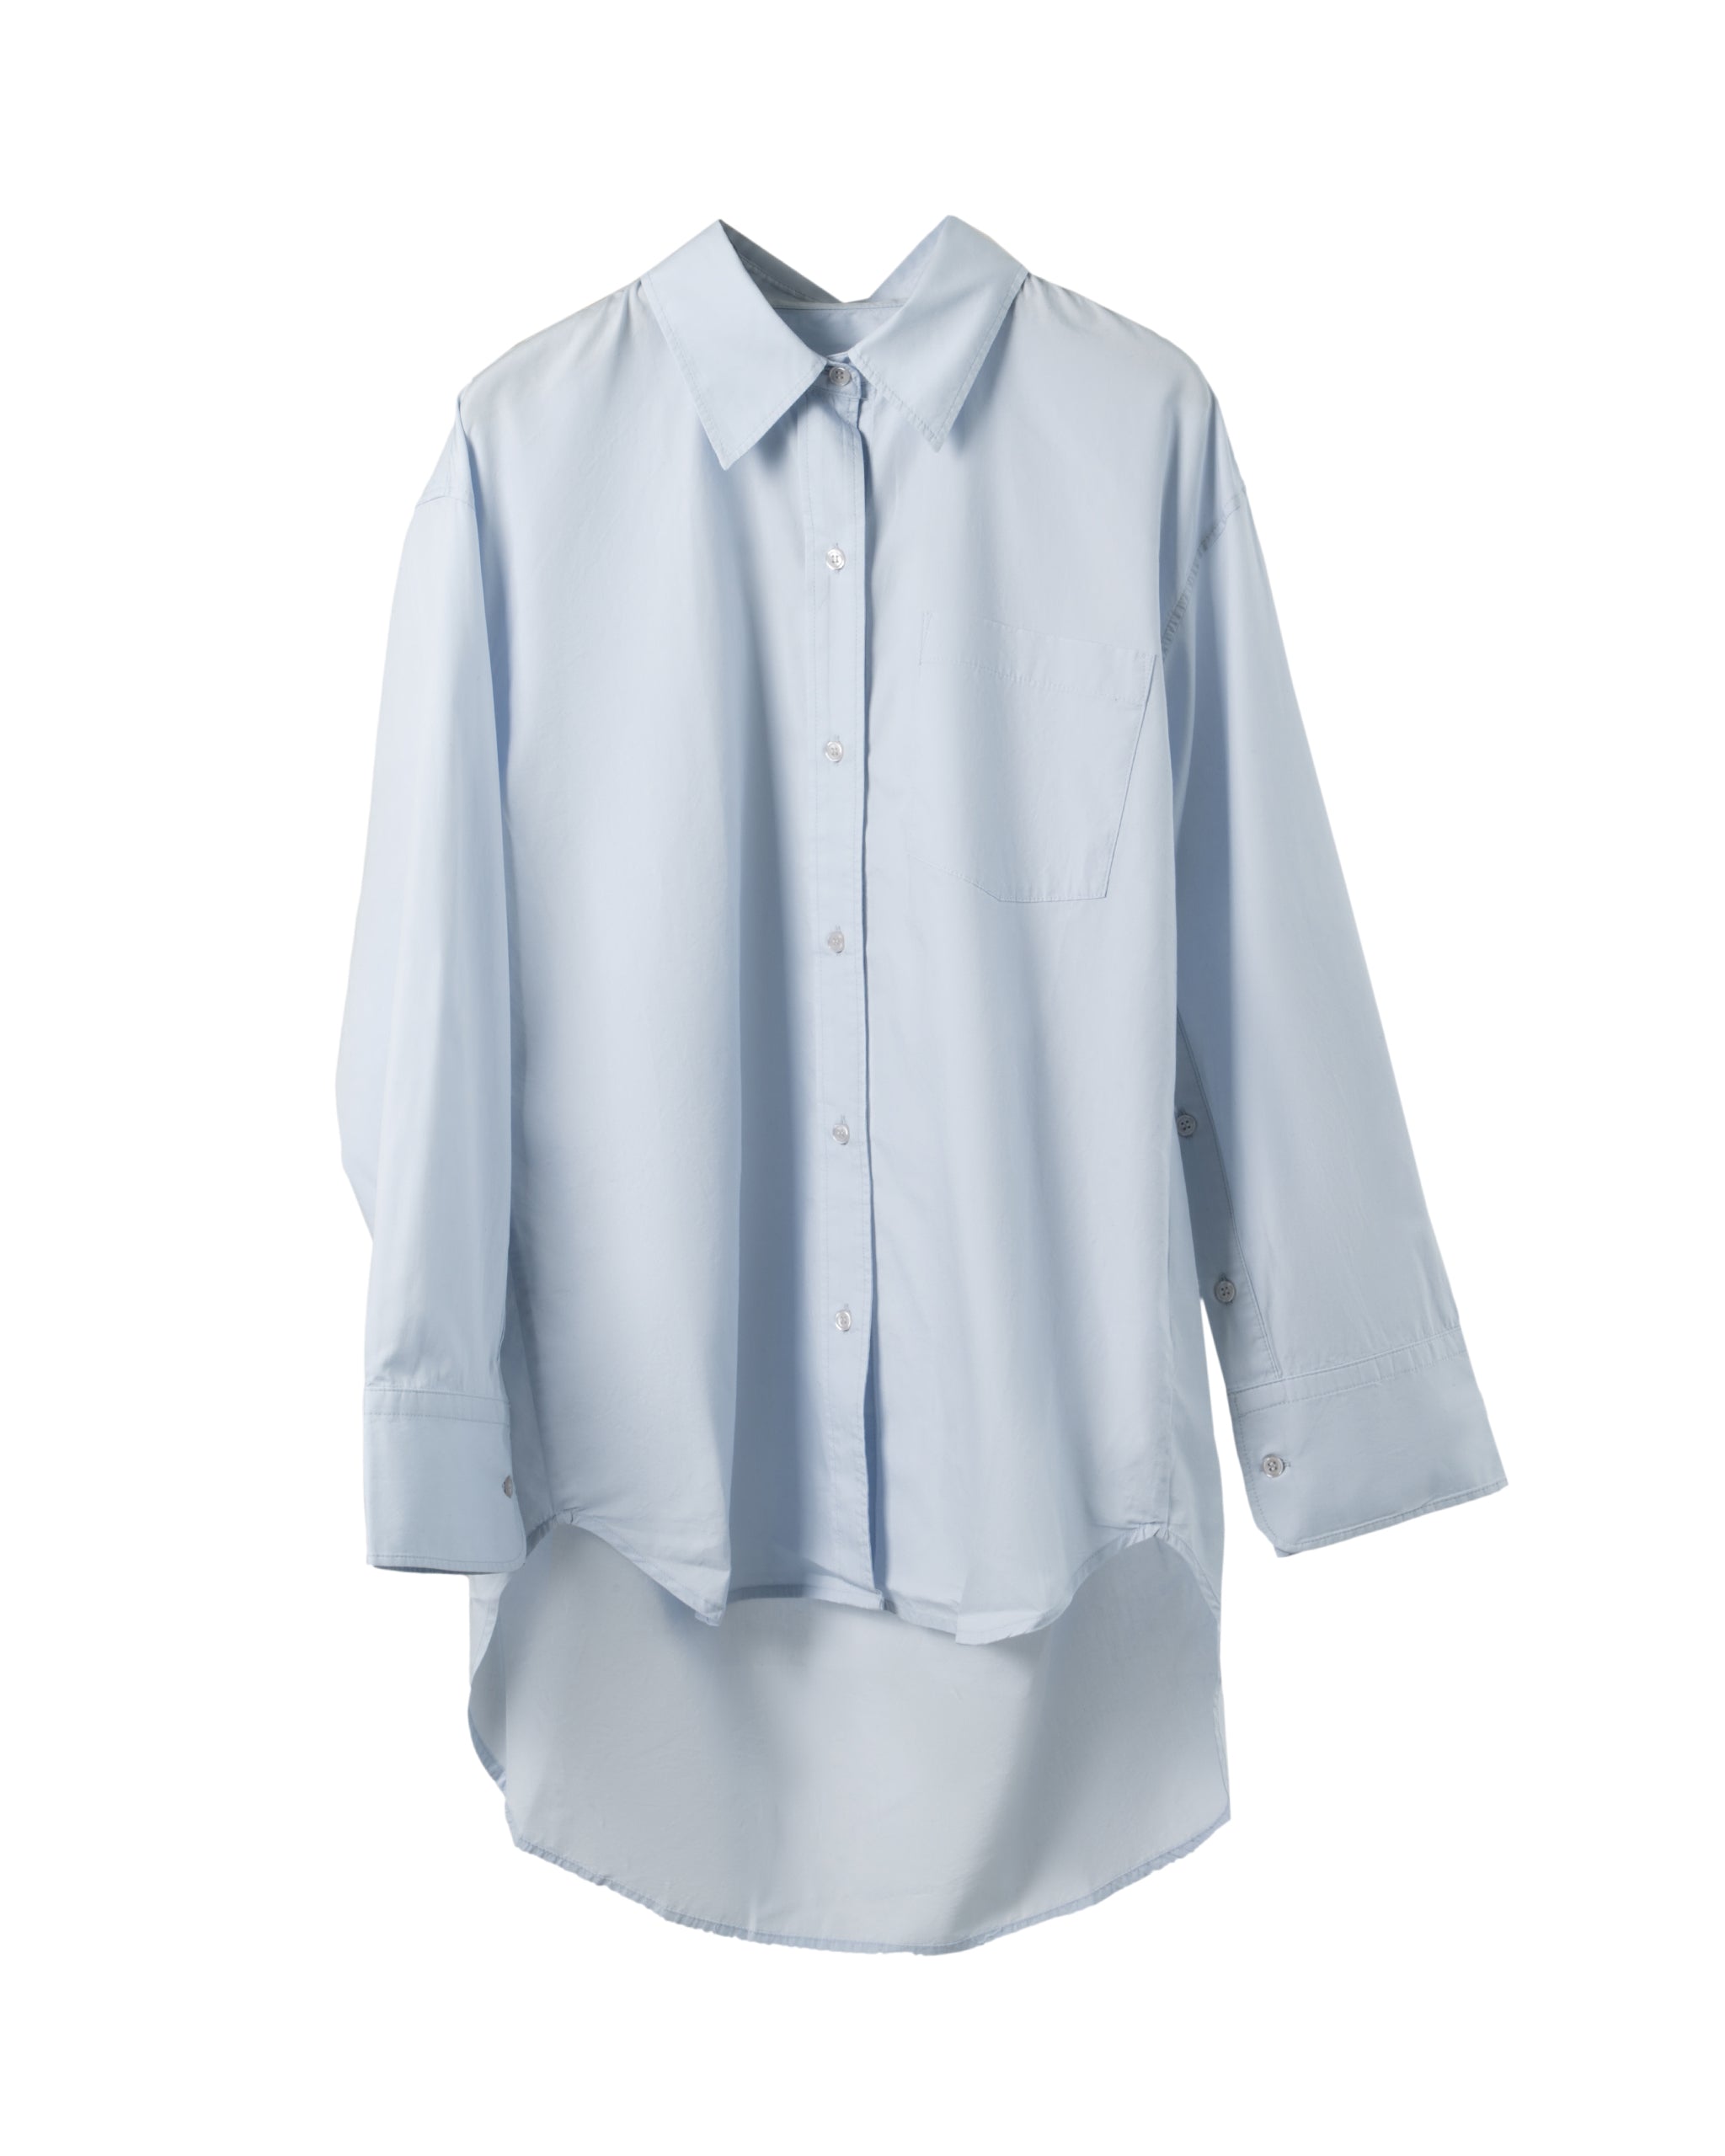 COCOON SHIRT OVERSIZE FIT